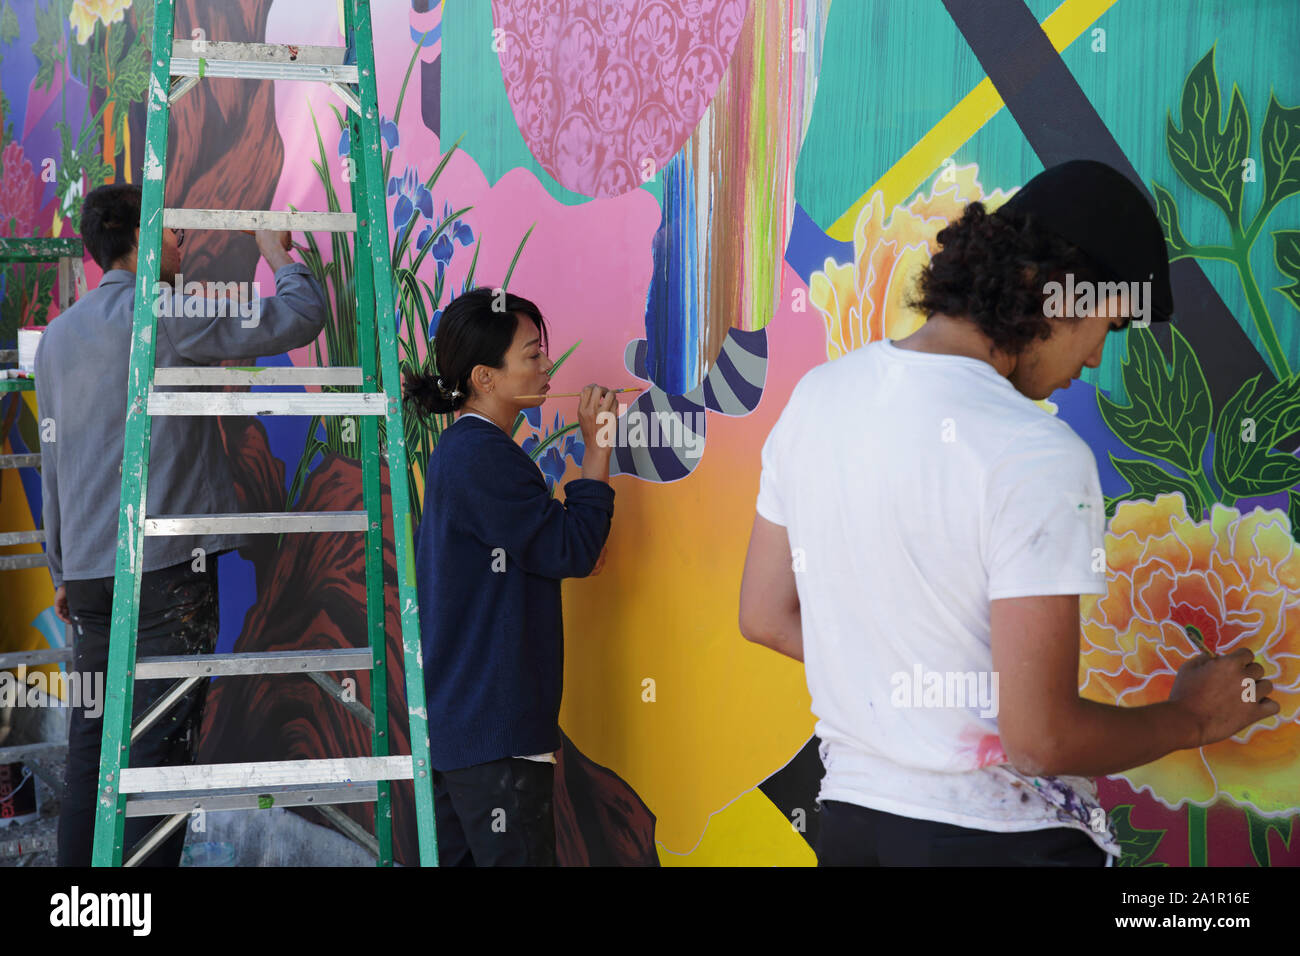 New York, NY USA - September 20, 2019: View of the fine art painting by Tomokazu Matsuyama on the Bowery Mural Wall on Houston Street Stock Photo